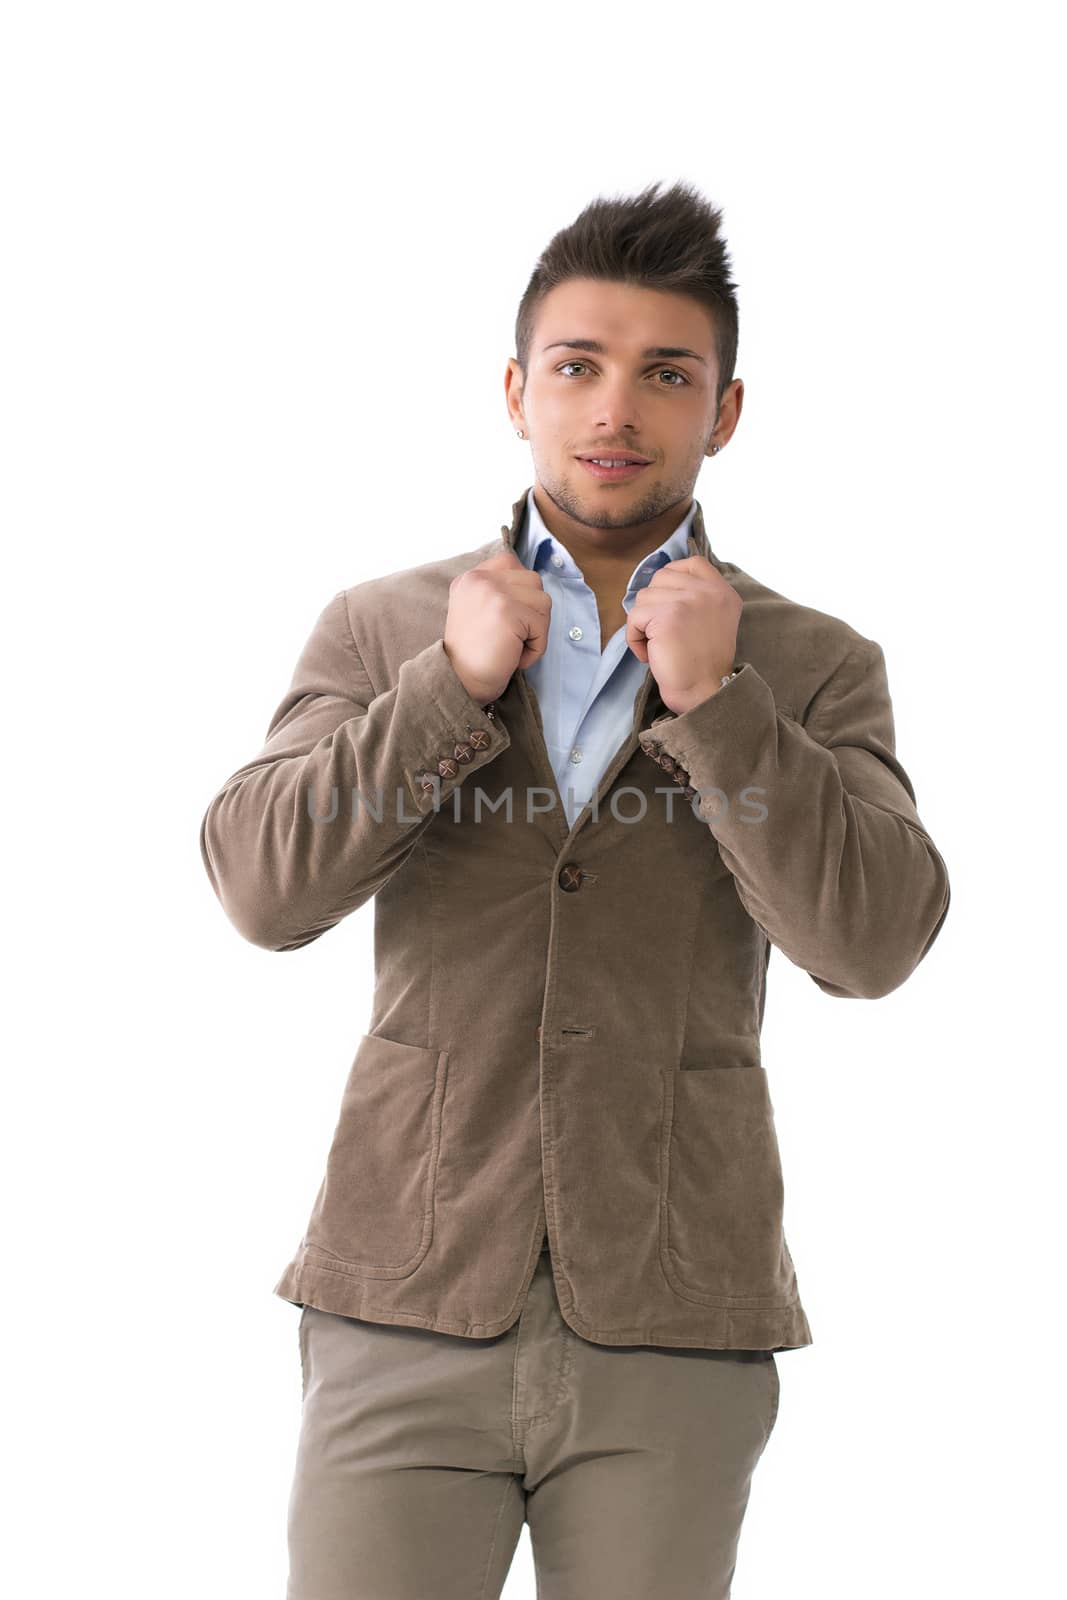 Handsome young man with winter jacket, isolated on white, holding shirt neck